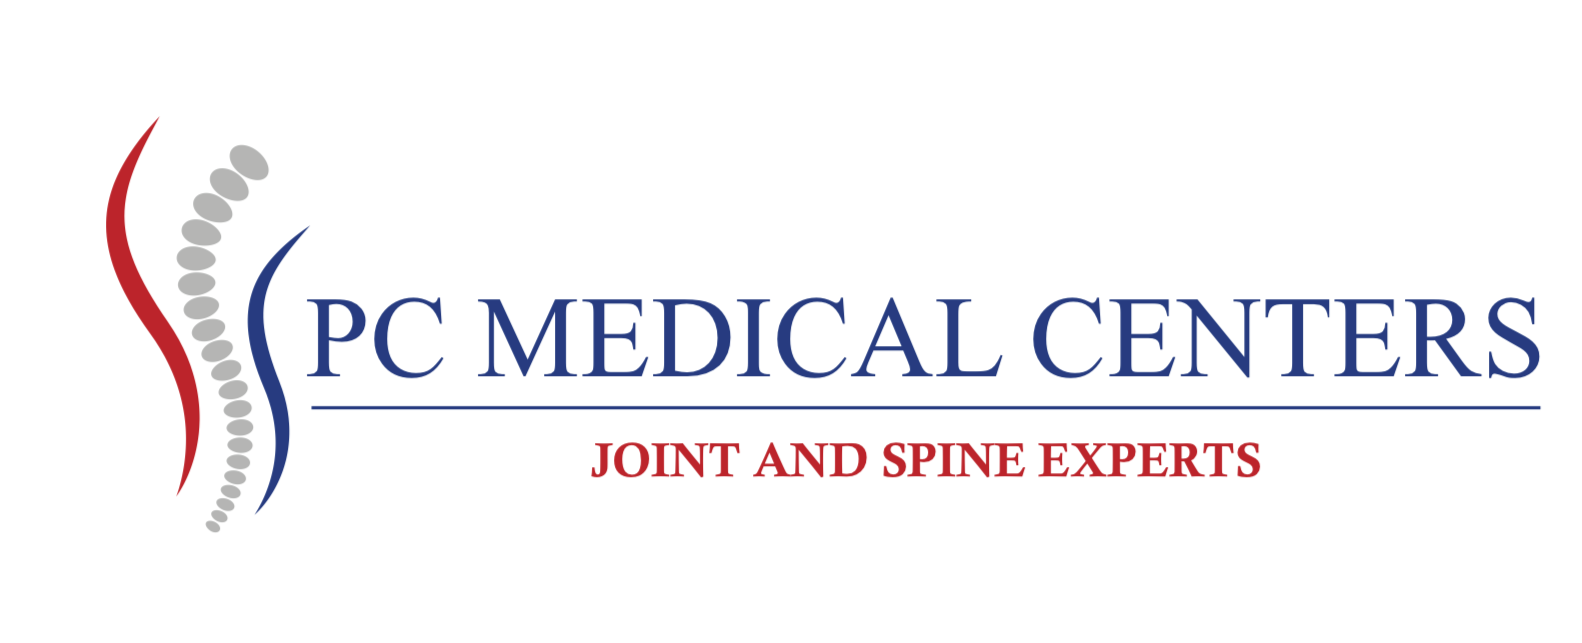 PC Medical Centers